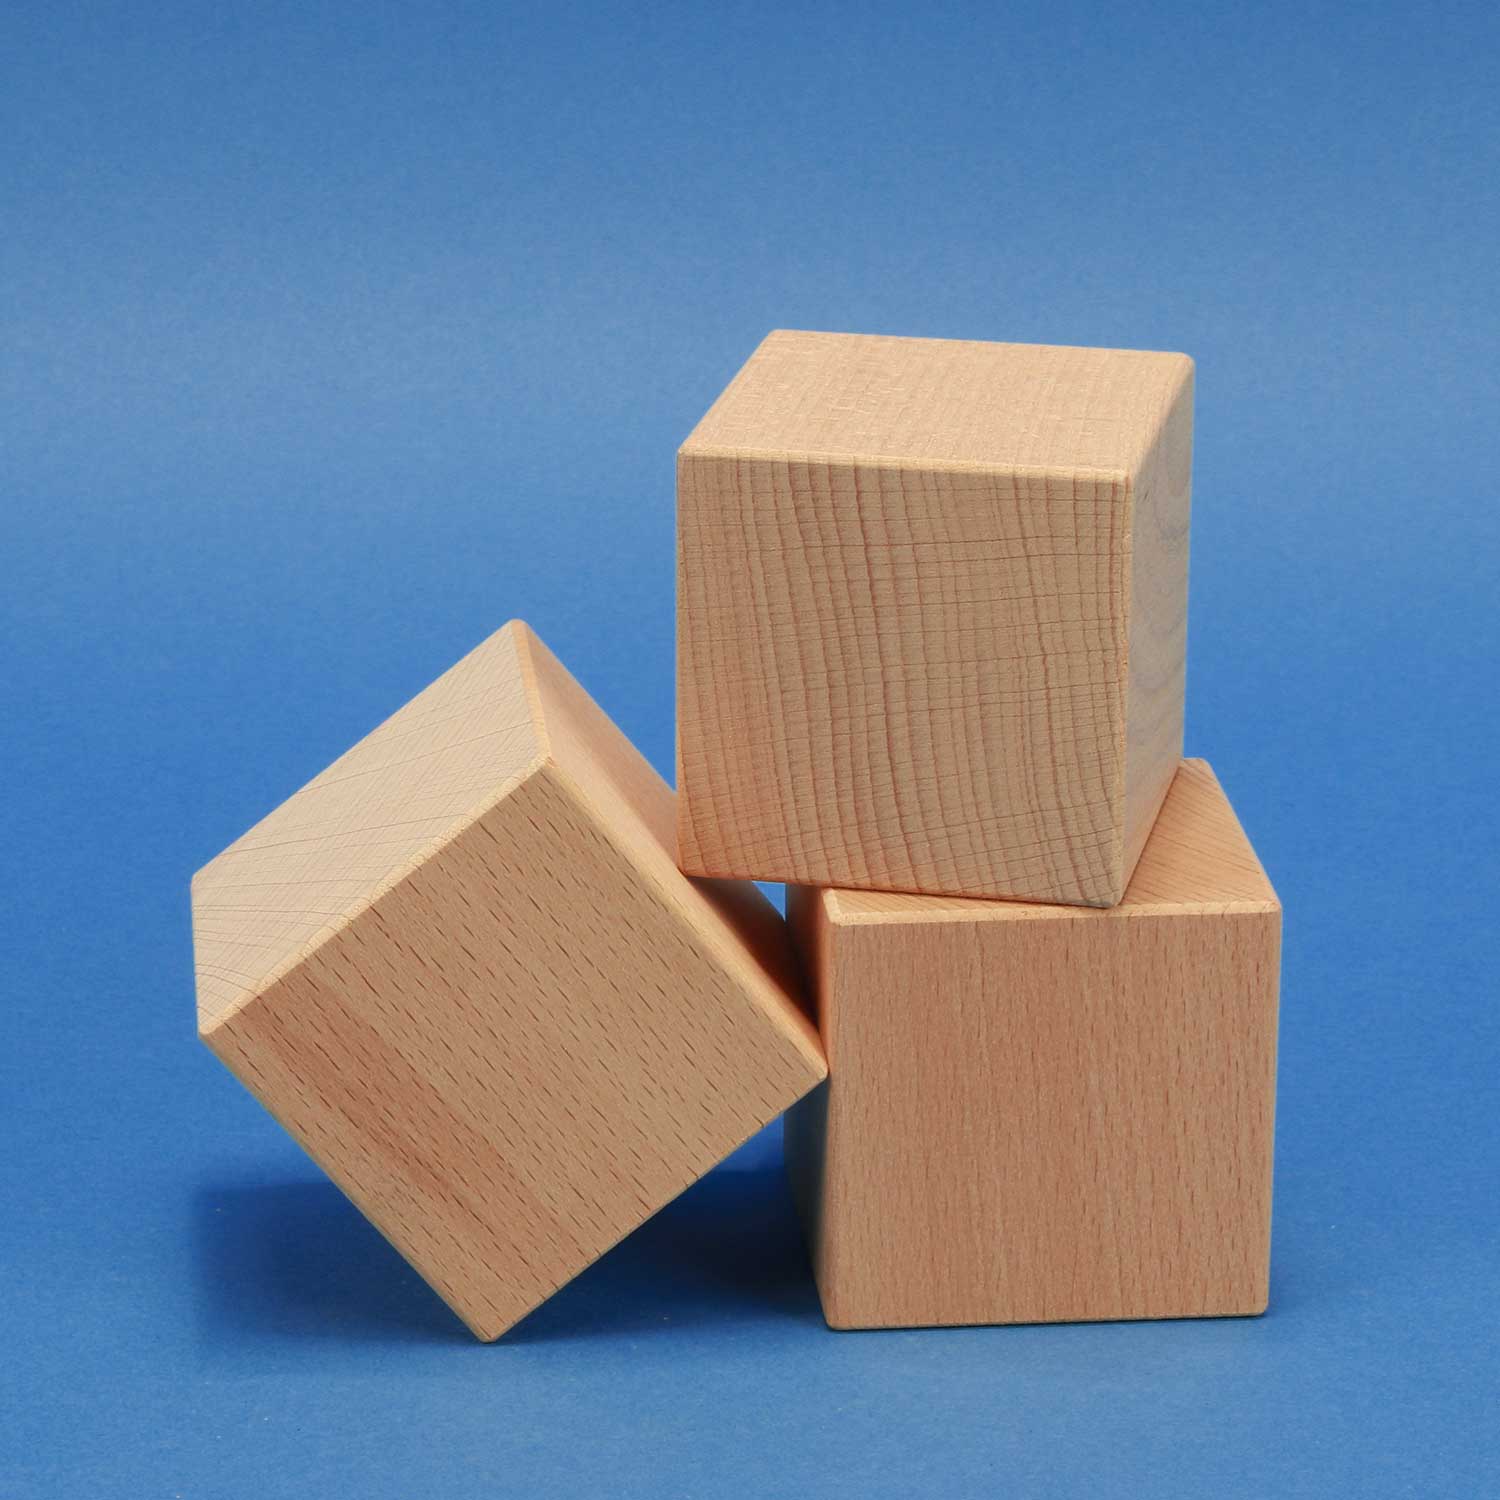 Wooden cubes for laser engraving and digital printing